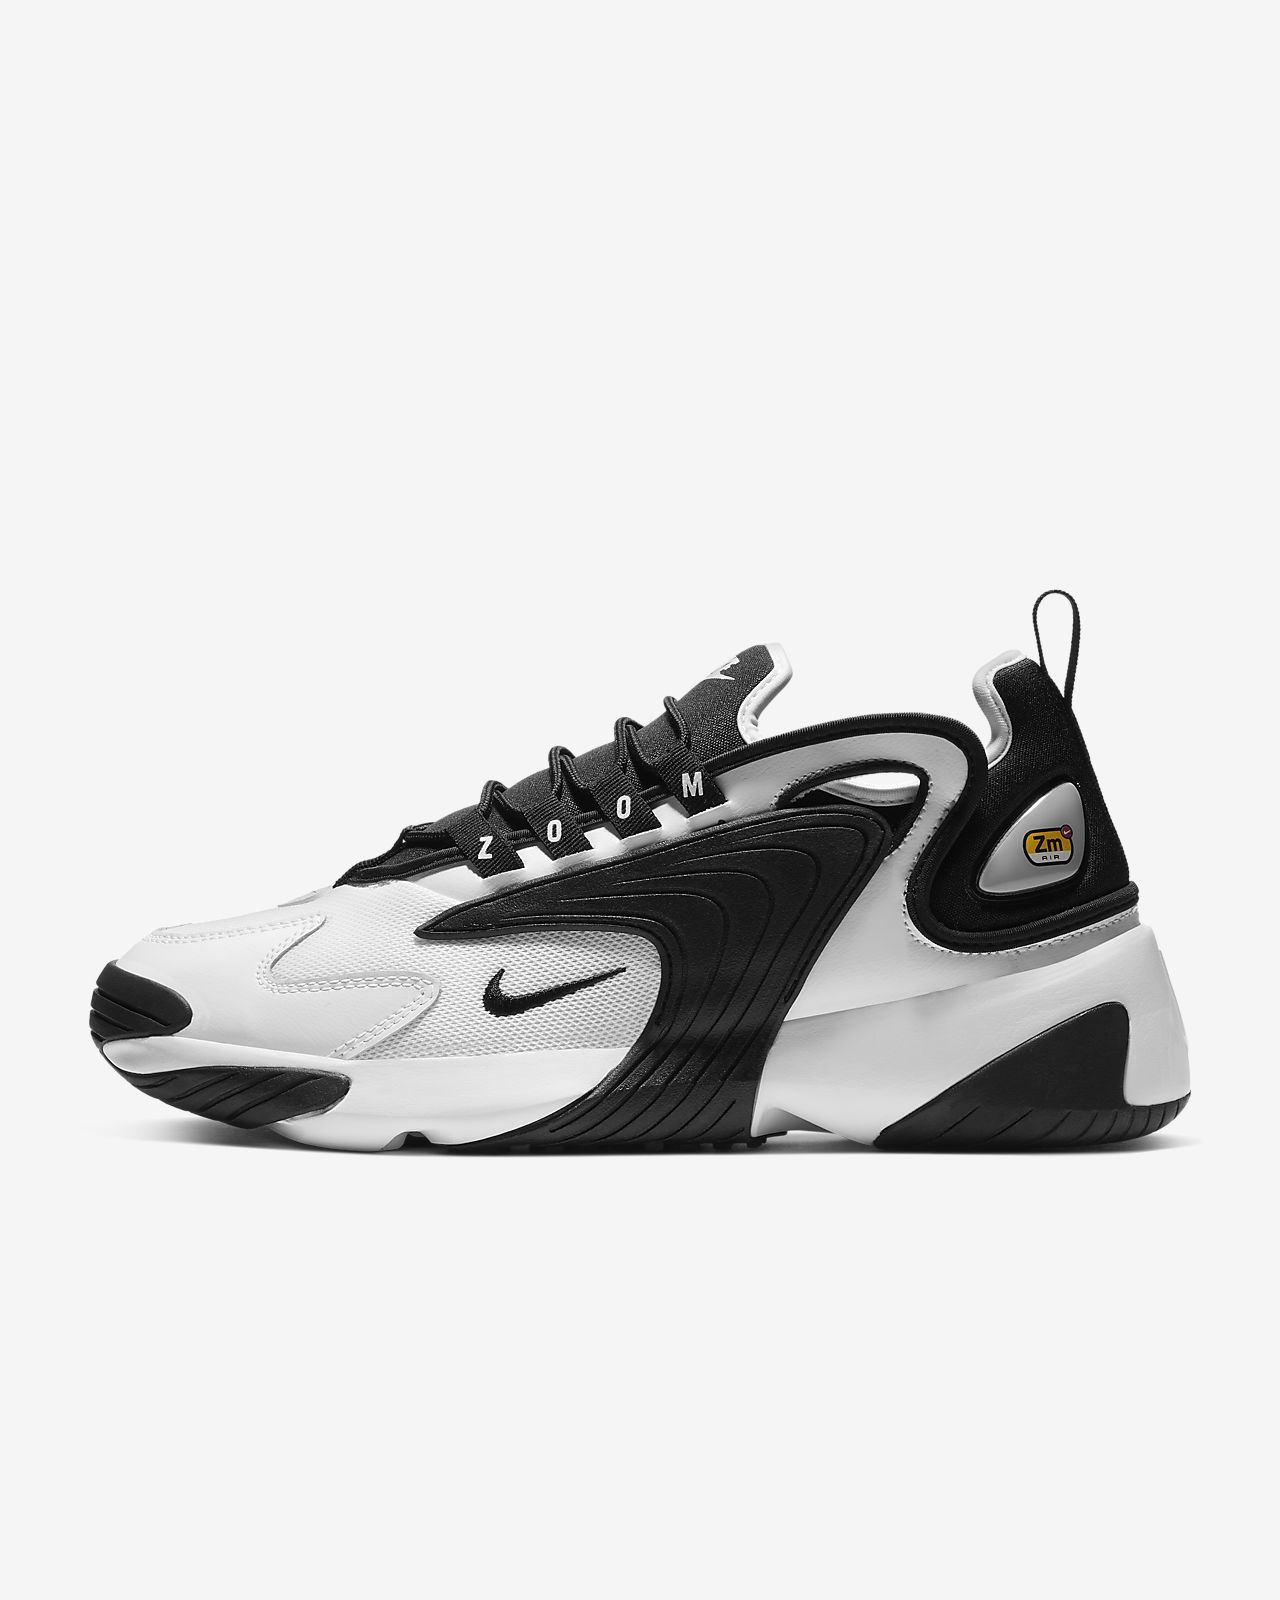 Nike Zoom 2k White And Black Factory Sale, UP TO 70% OFF